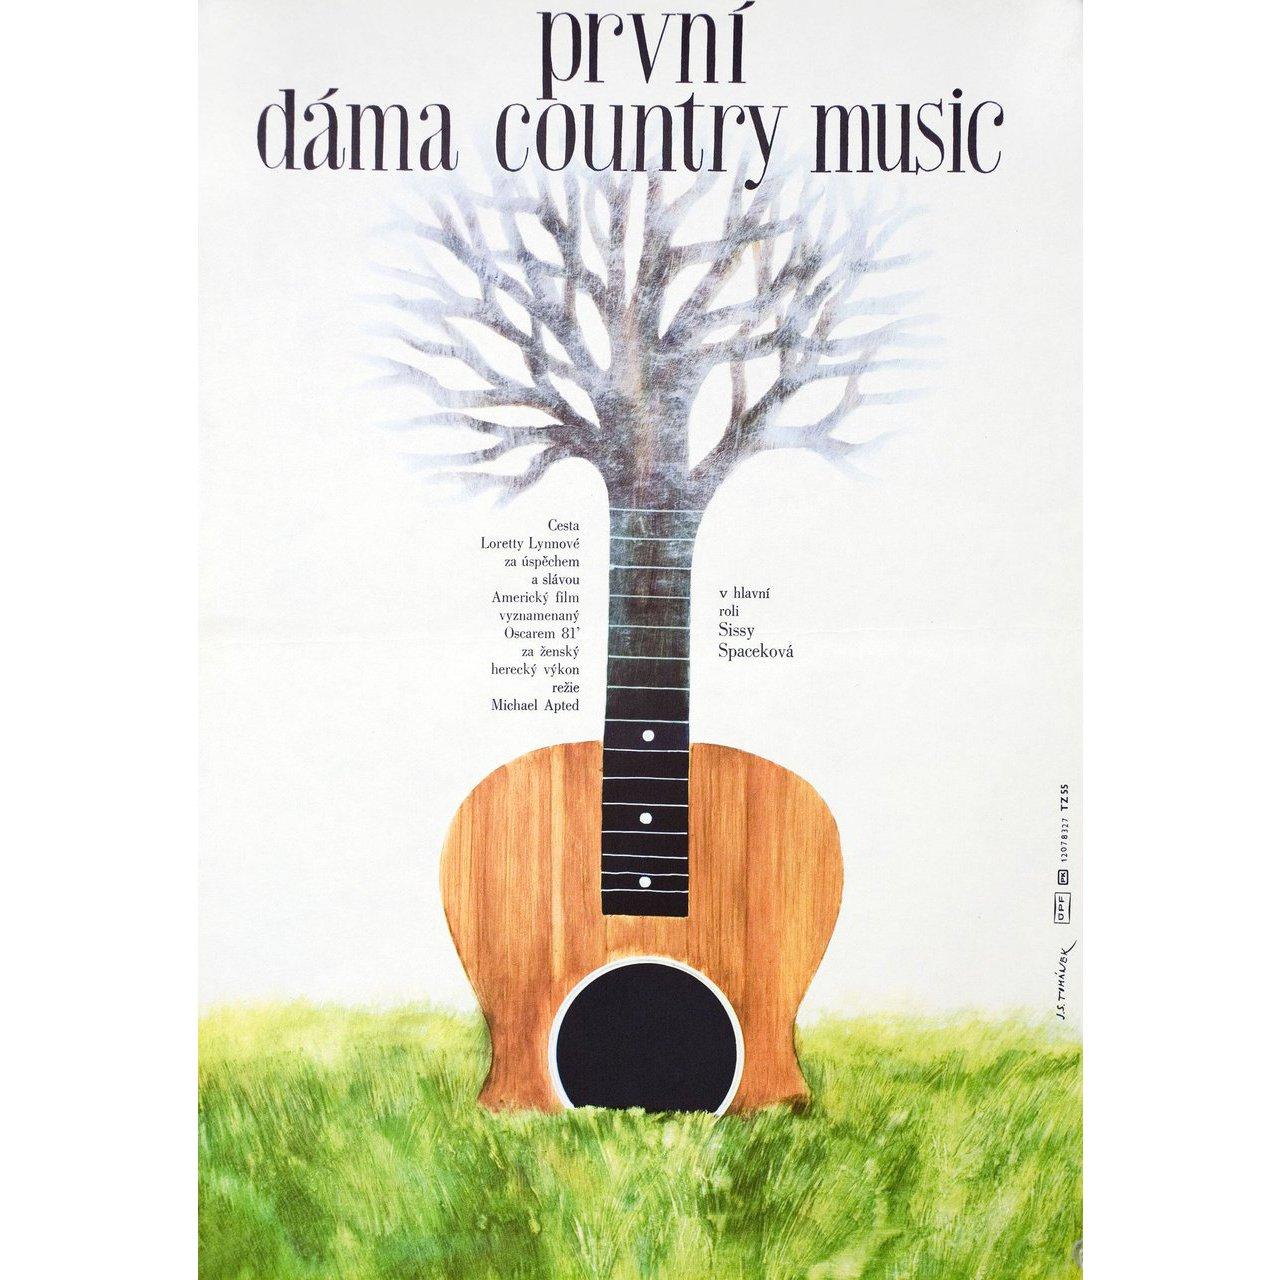 Original 1983 Czech A3 poster by Jan S. Tomanek for the 1980 film Coal Miner's Daughter directed by Michael Apted with Sissy Spacek / Tommy Lee Jones / Levon Helm / Phyllis Boyens. Fine condition, rolled. Please note: the size is stated in inches